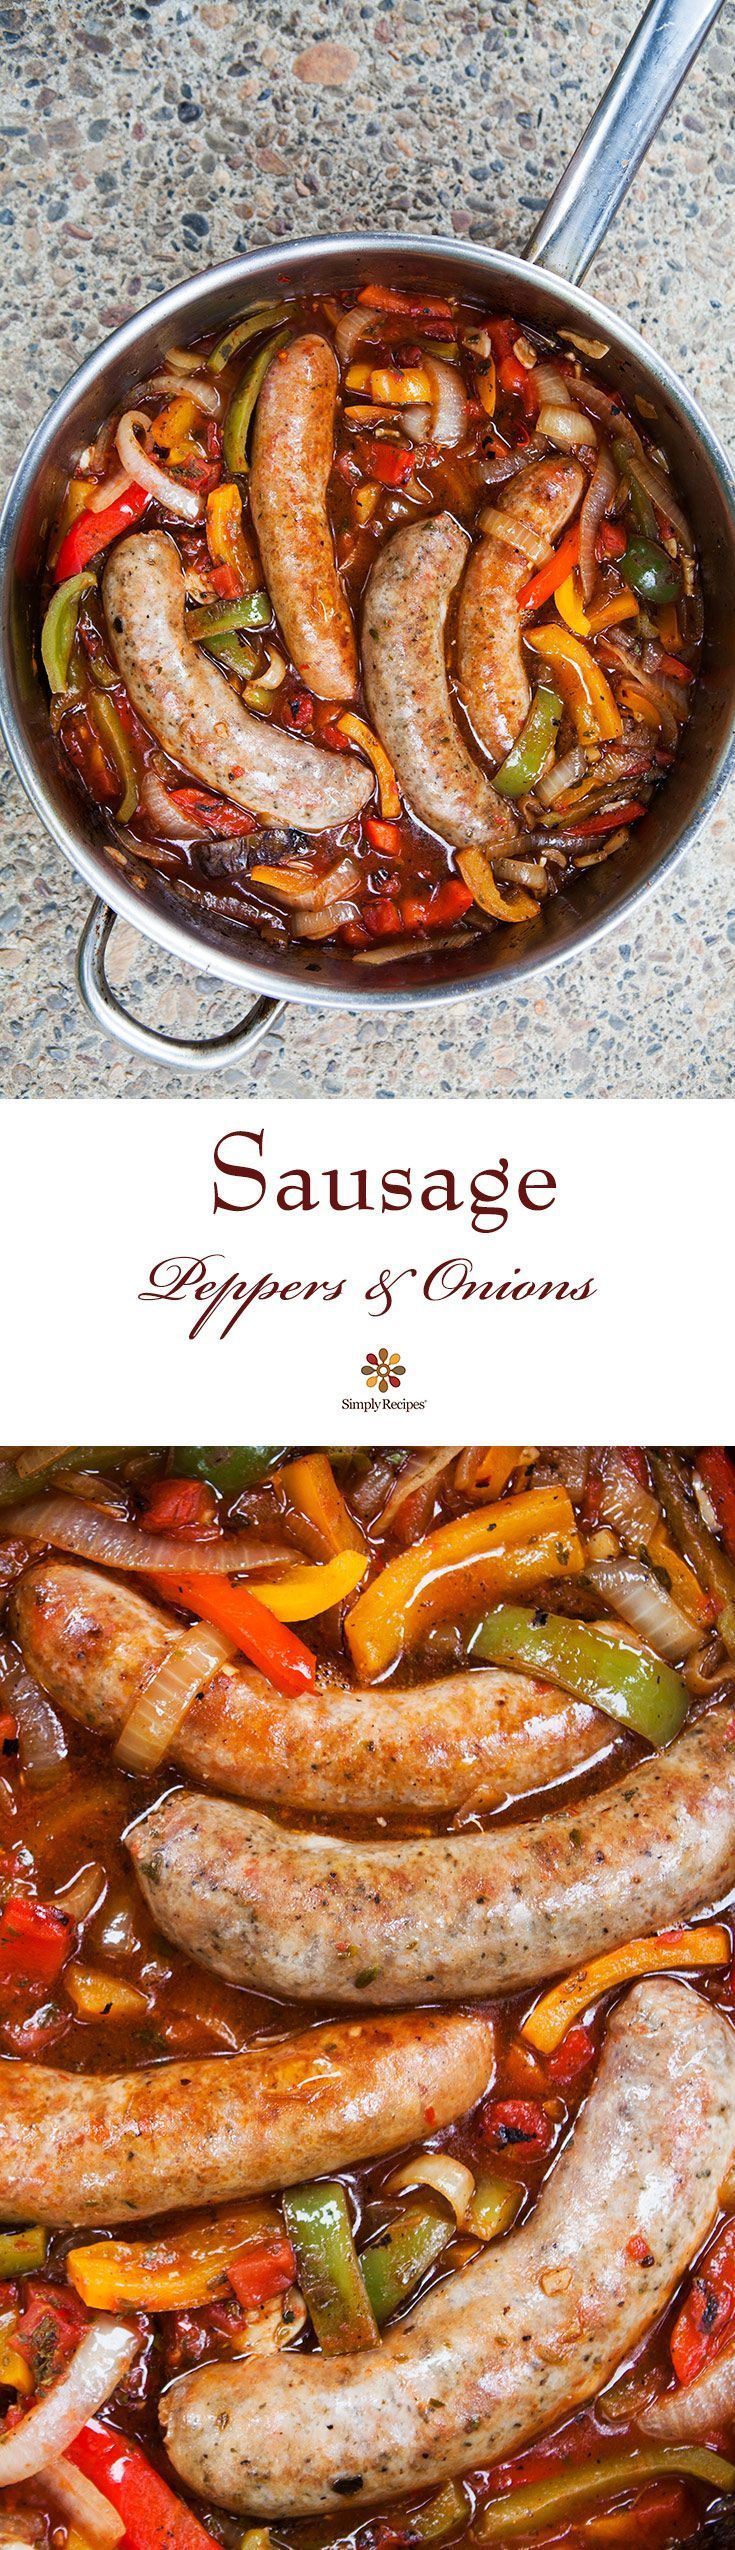 Sausage, Peppers, and Onions ~ Italian sausages cooked with bell peppers, sweet onions, crushed tomatoes, and garlic. Served in a